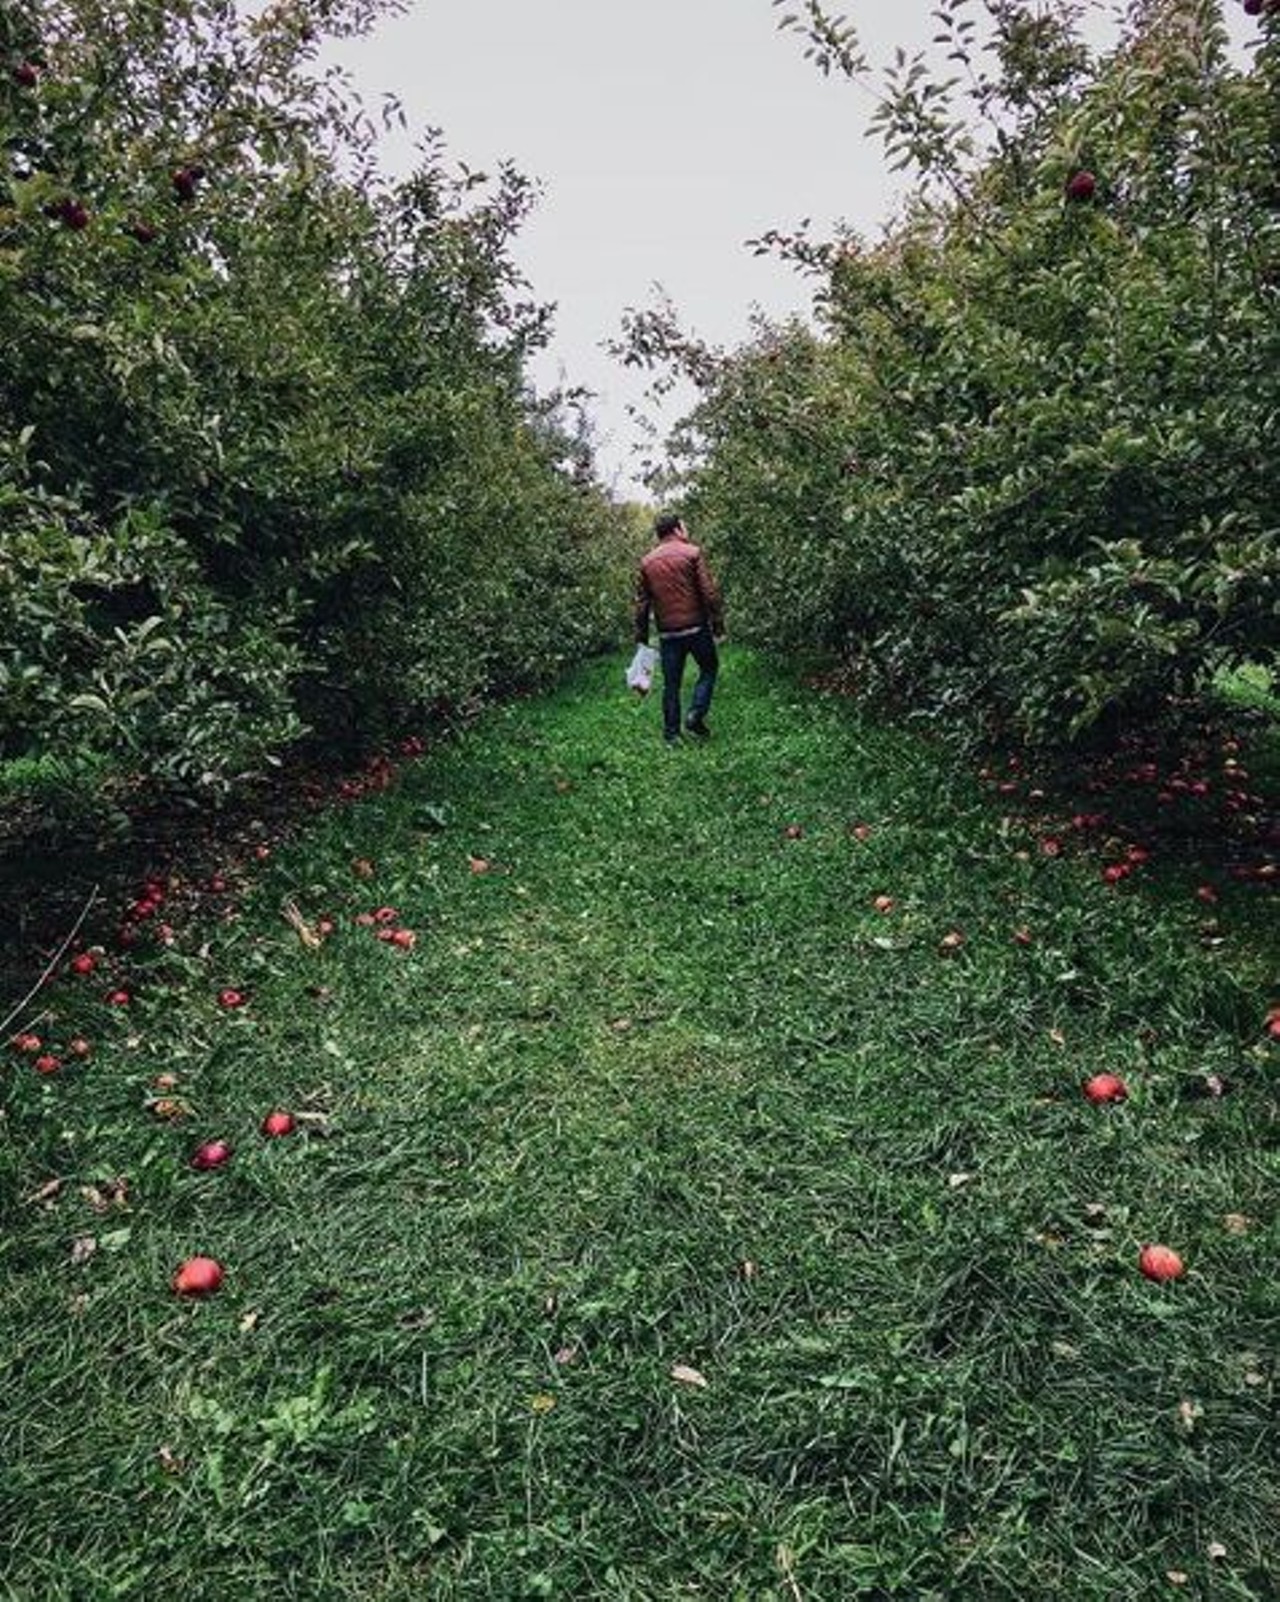 Miller&#146;s Big Red Apple Orchard 
4900 32 Mile Rd., Washington Twp.; 586-752-7888; millers-bigred.com  
Miller&#146;s has wagon rides, a petting farm and the alarmingly titled &#147;Straw Mountain.&#148; This year there will be U-Pick raspberries, pumpkins, and apples. Photo via @chelseahartner. 